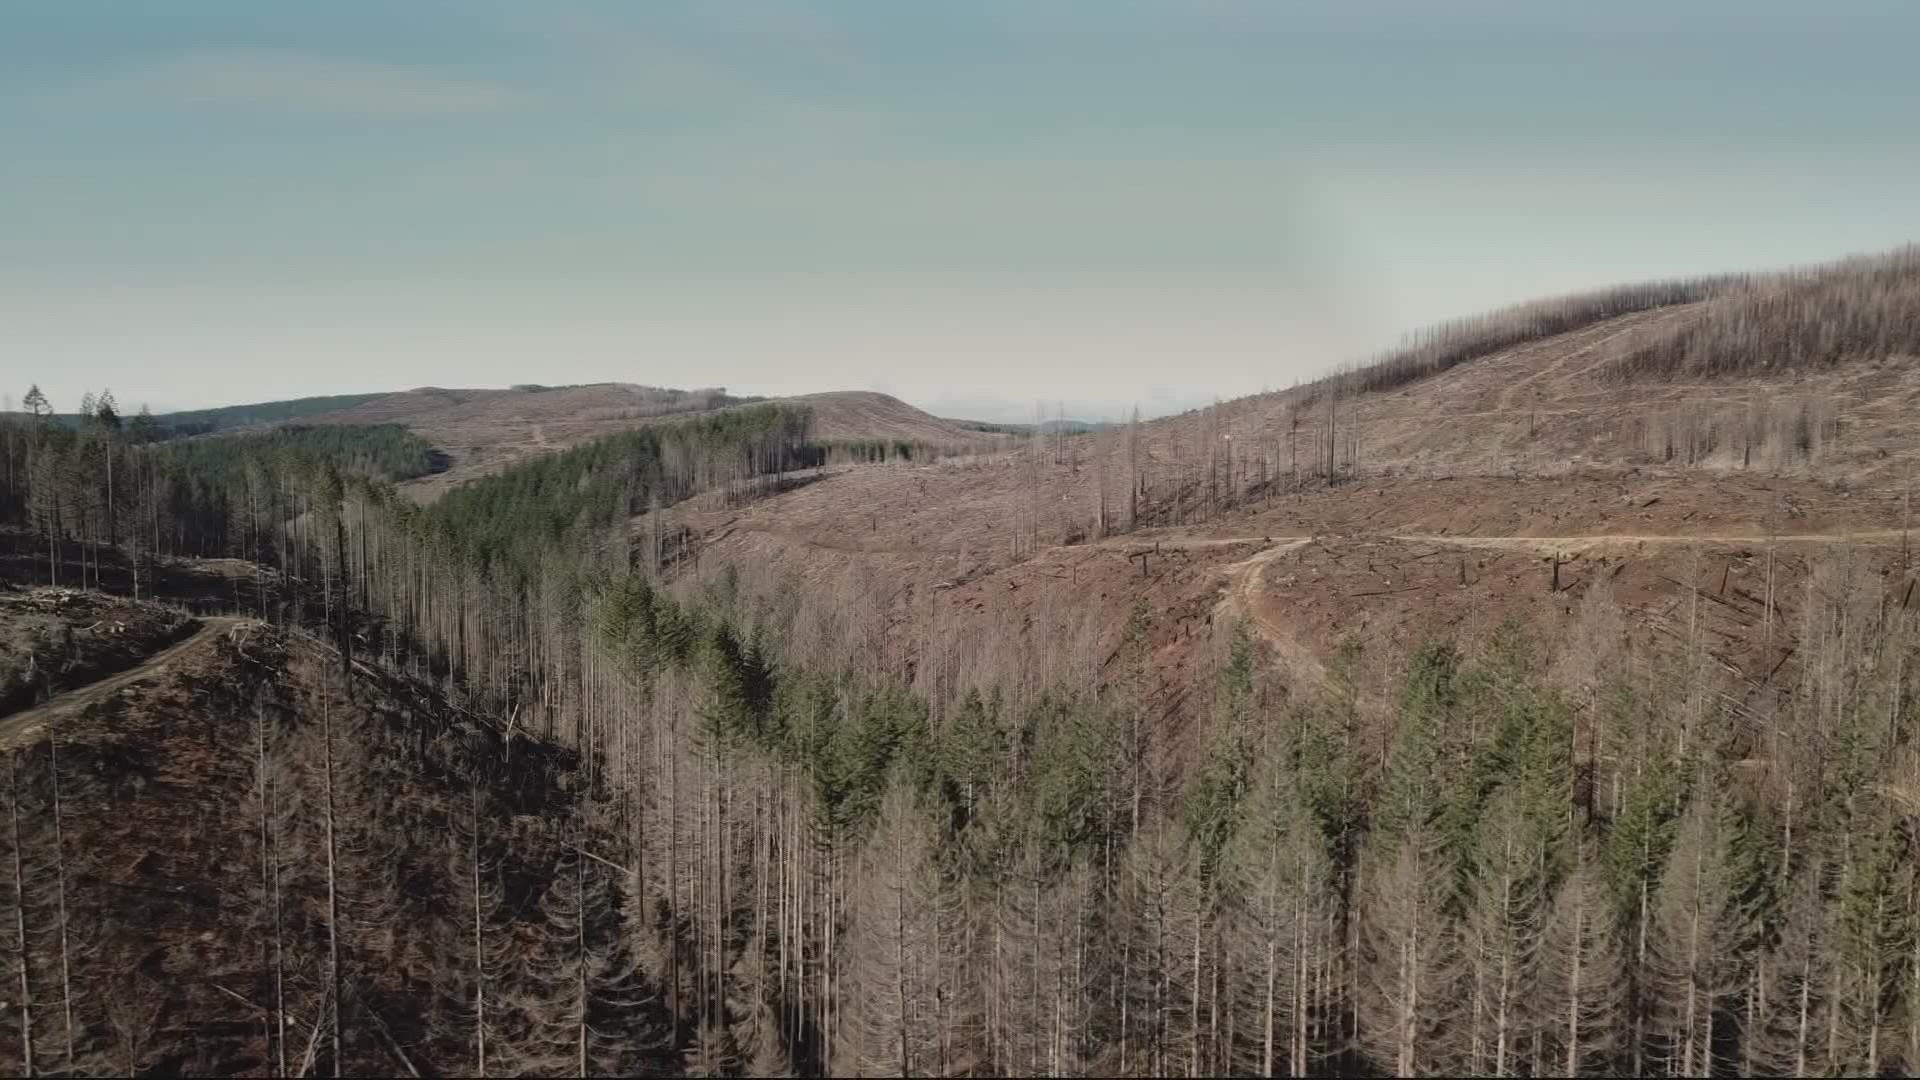 The crews can plant about 10,000 trees per day or more. The goal is to plant 1 million trees in severely burned areas of the Santiam State Forest.